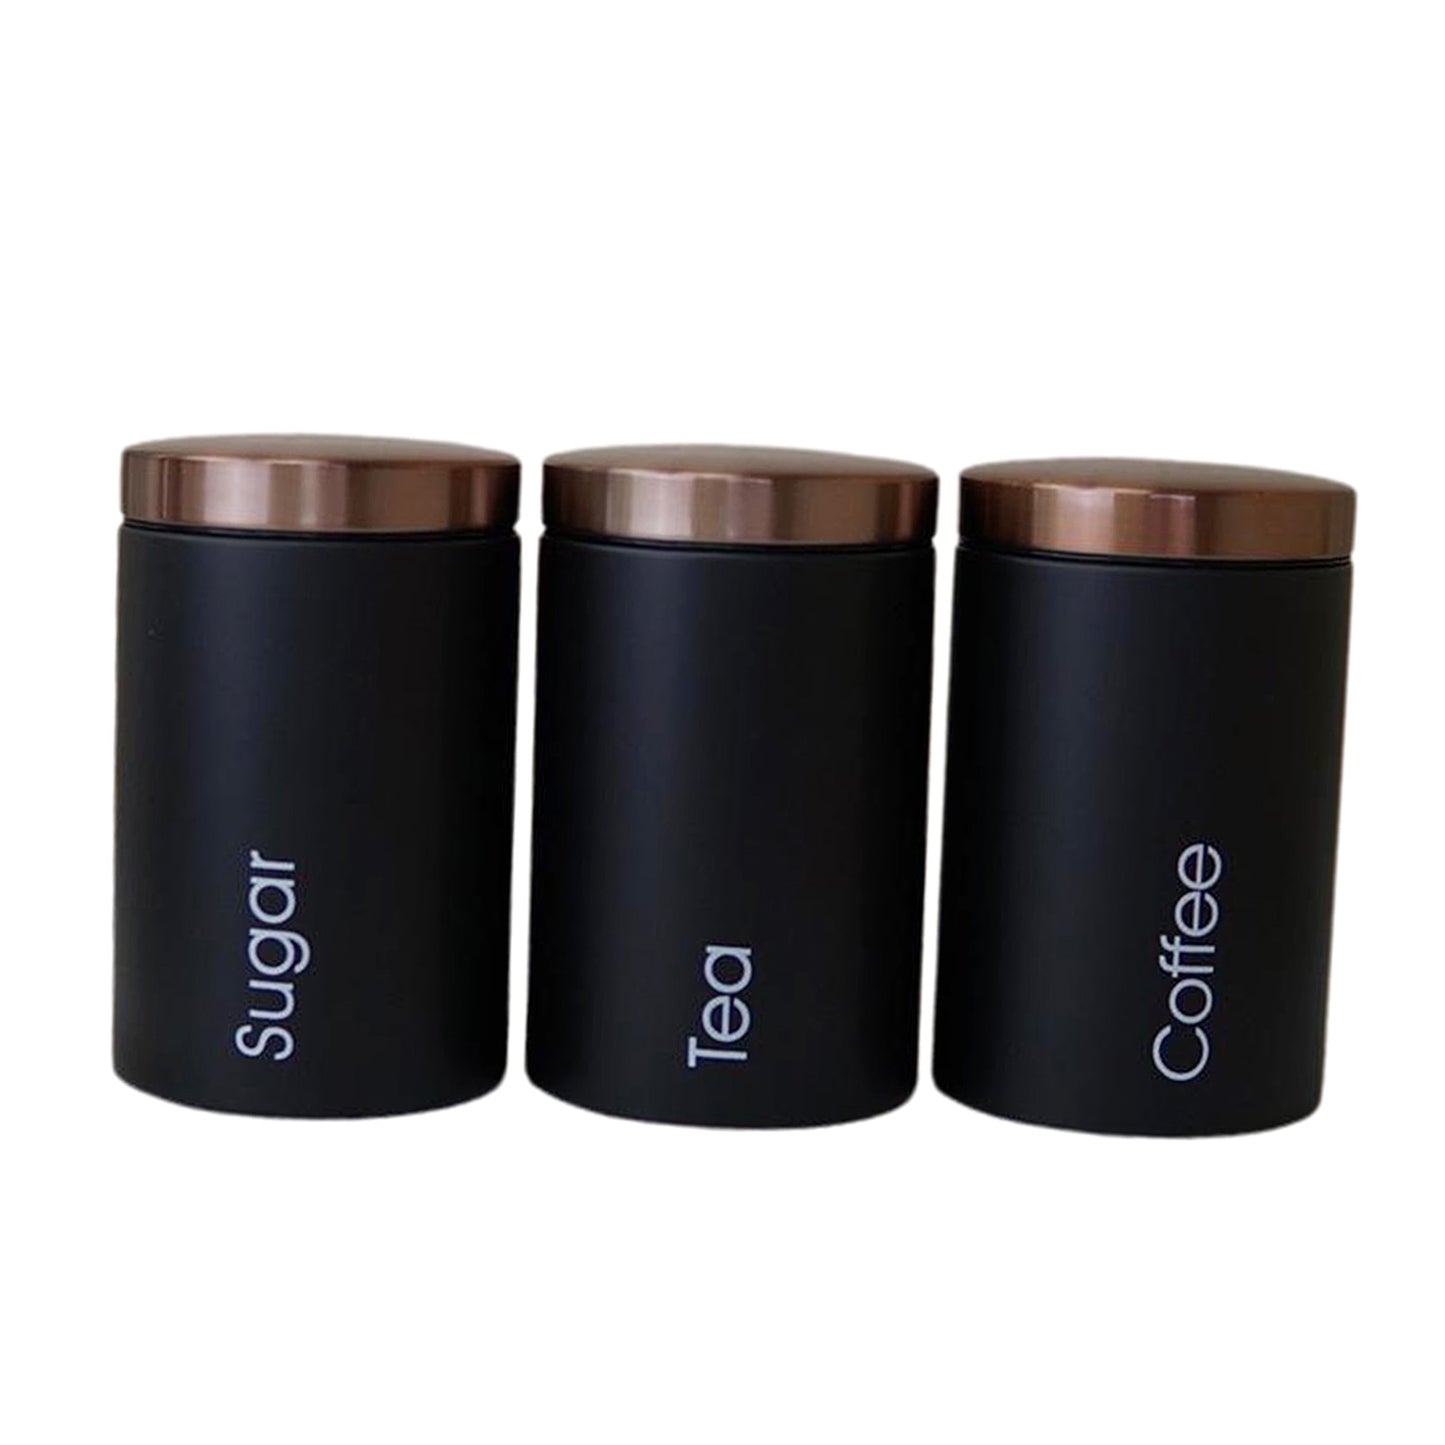 Canister Set for Tea Coffee Sugar